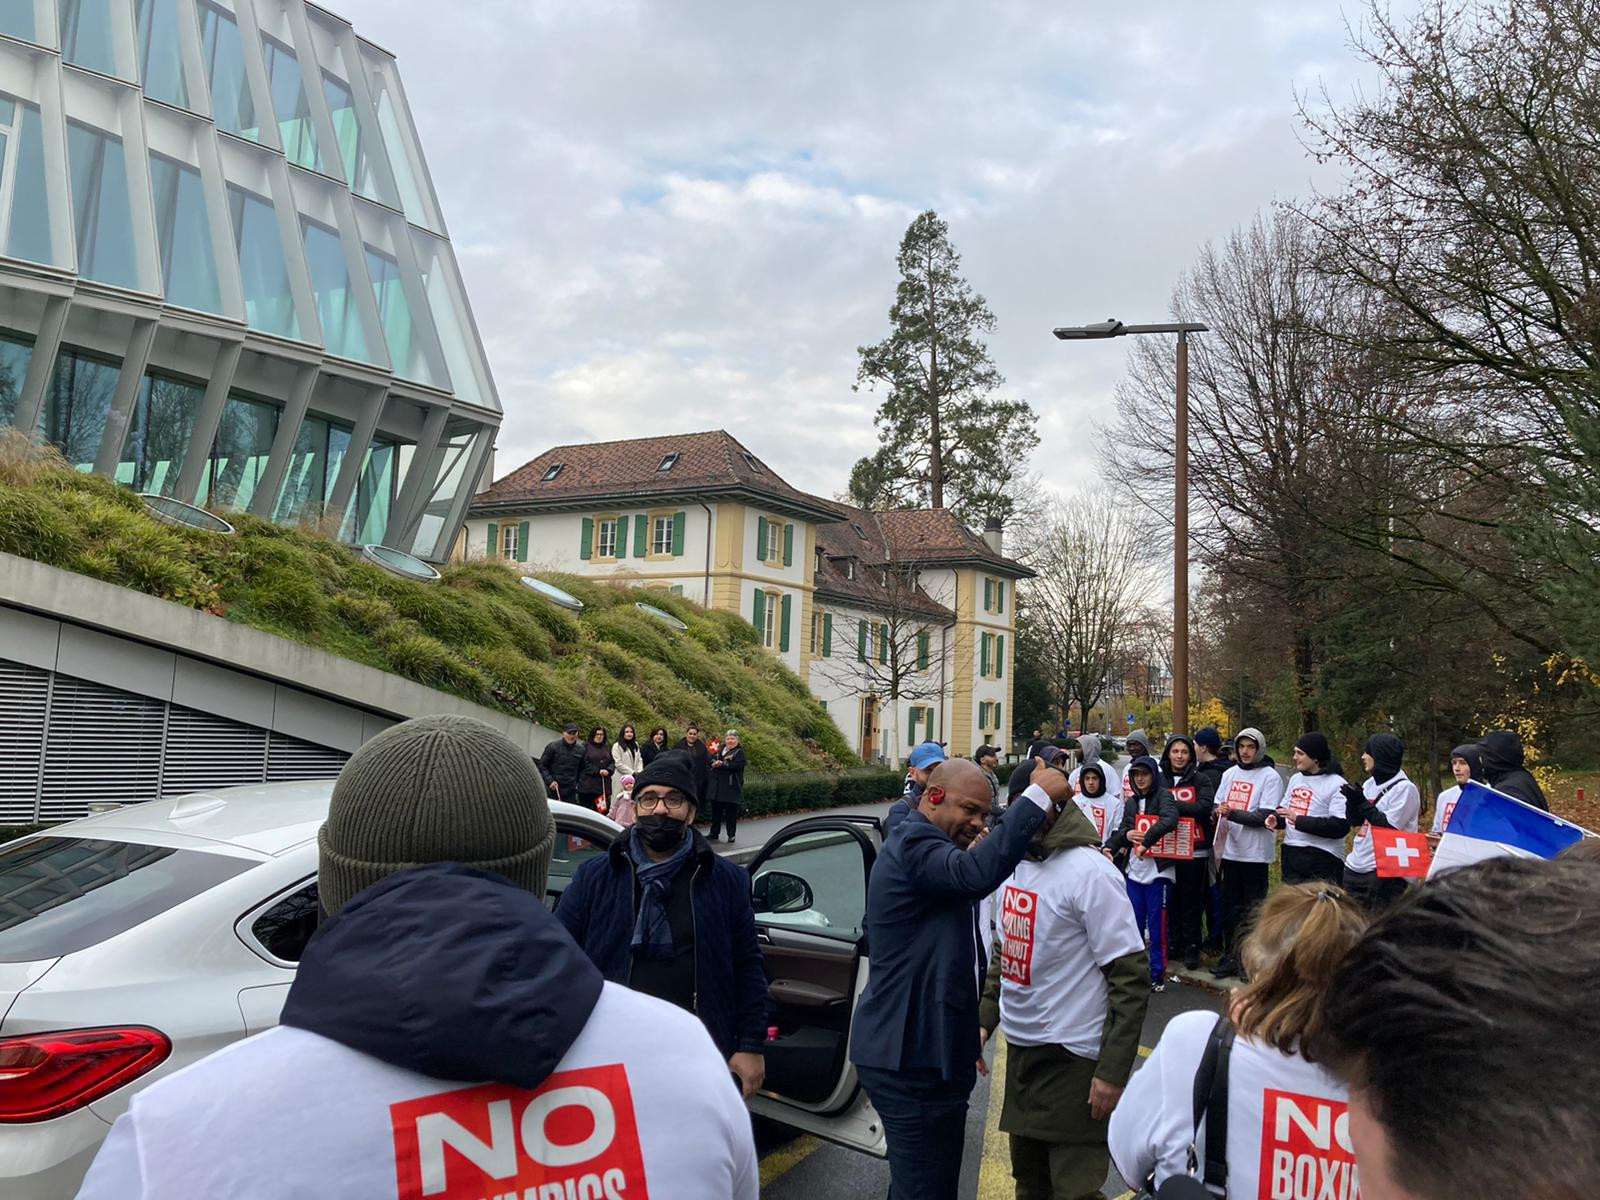 Roy Jones Jr was present the last time there was a peaceful protest outside the IOC headquarters in Lausanne in December ©ITG